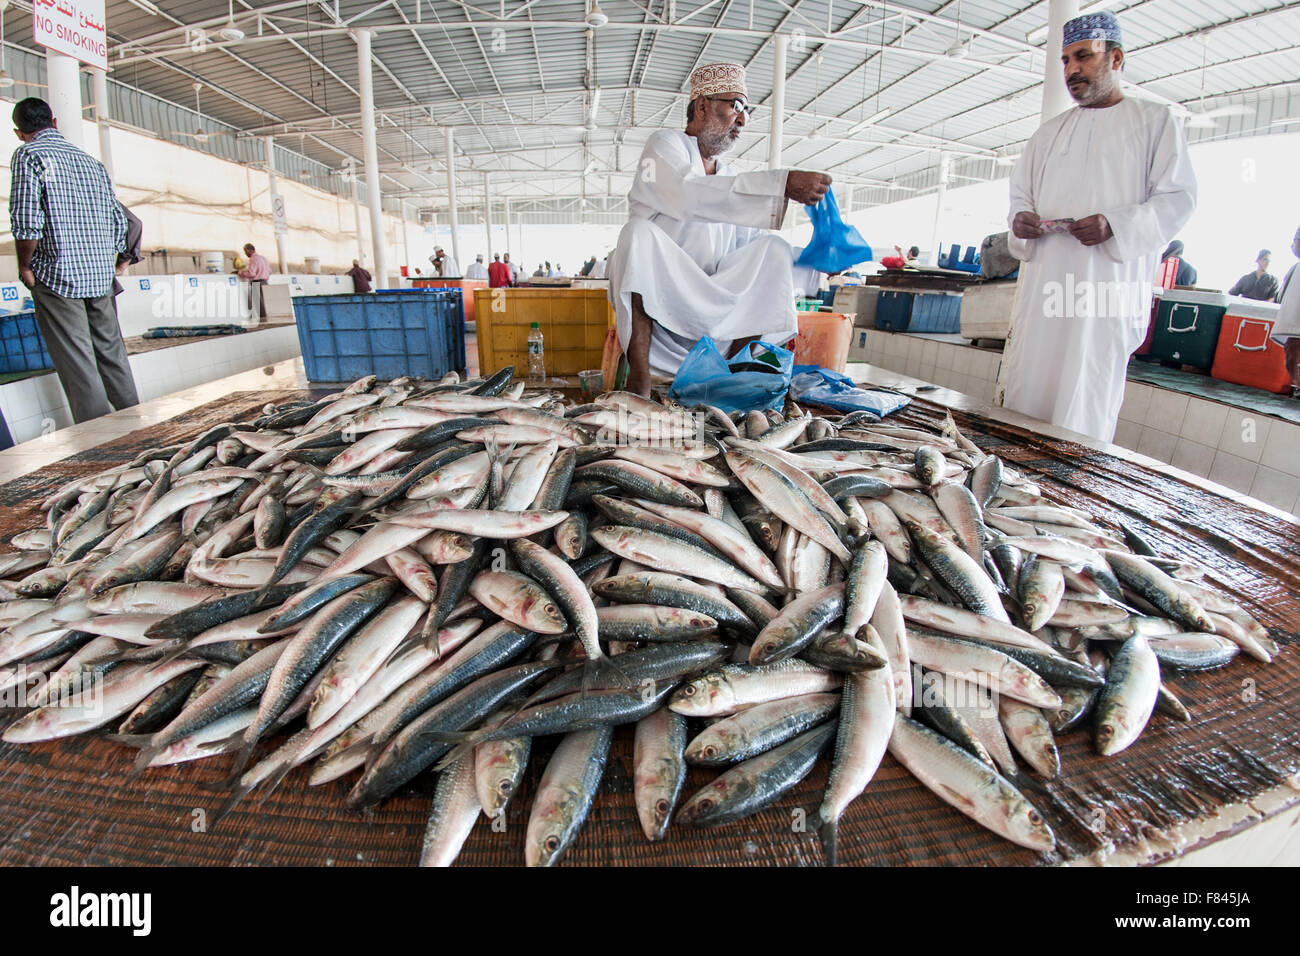 The Mutrah fish market in Muscat, the capital of the Sultanate of Oman. Stock Photo